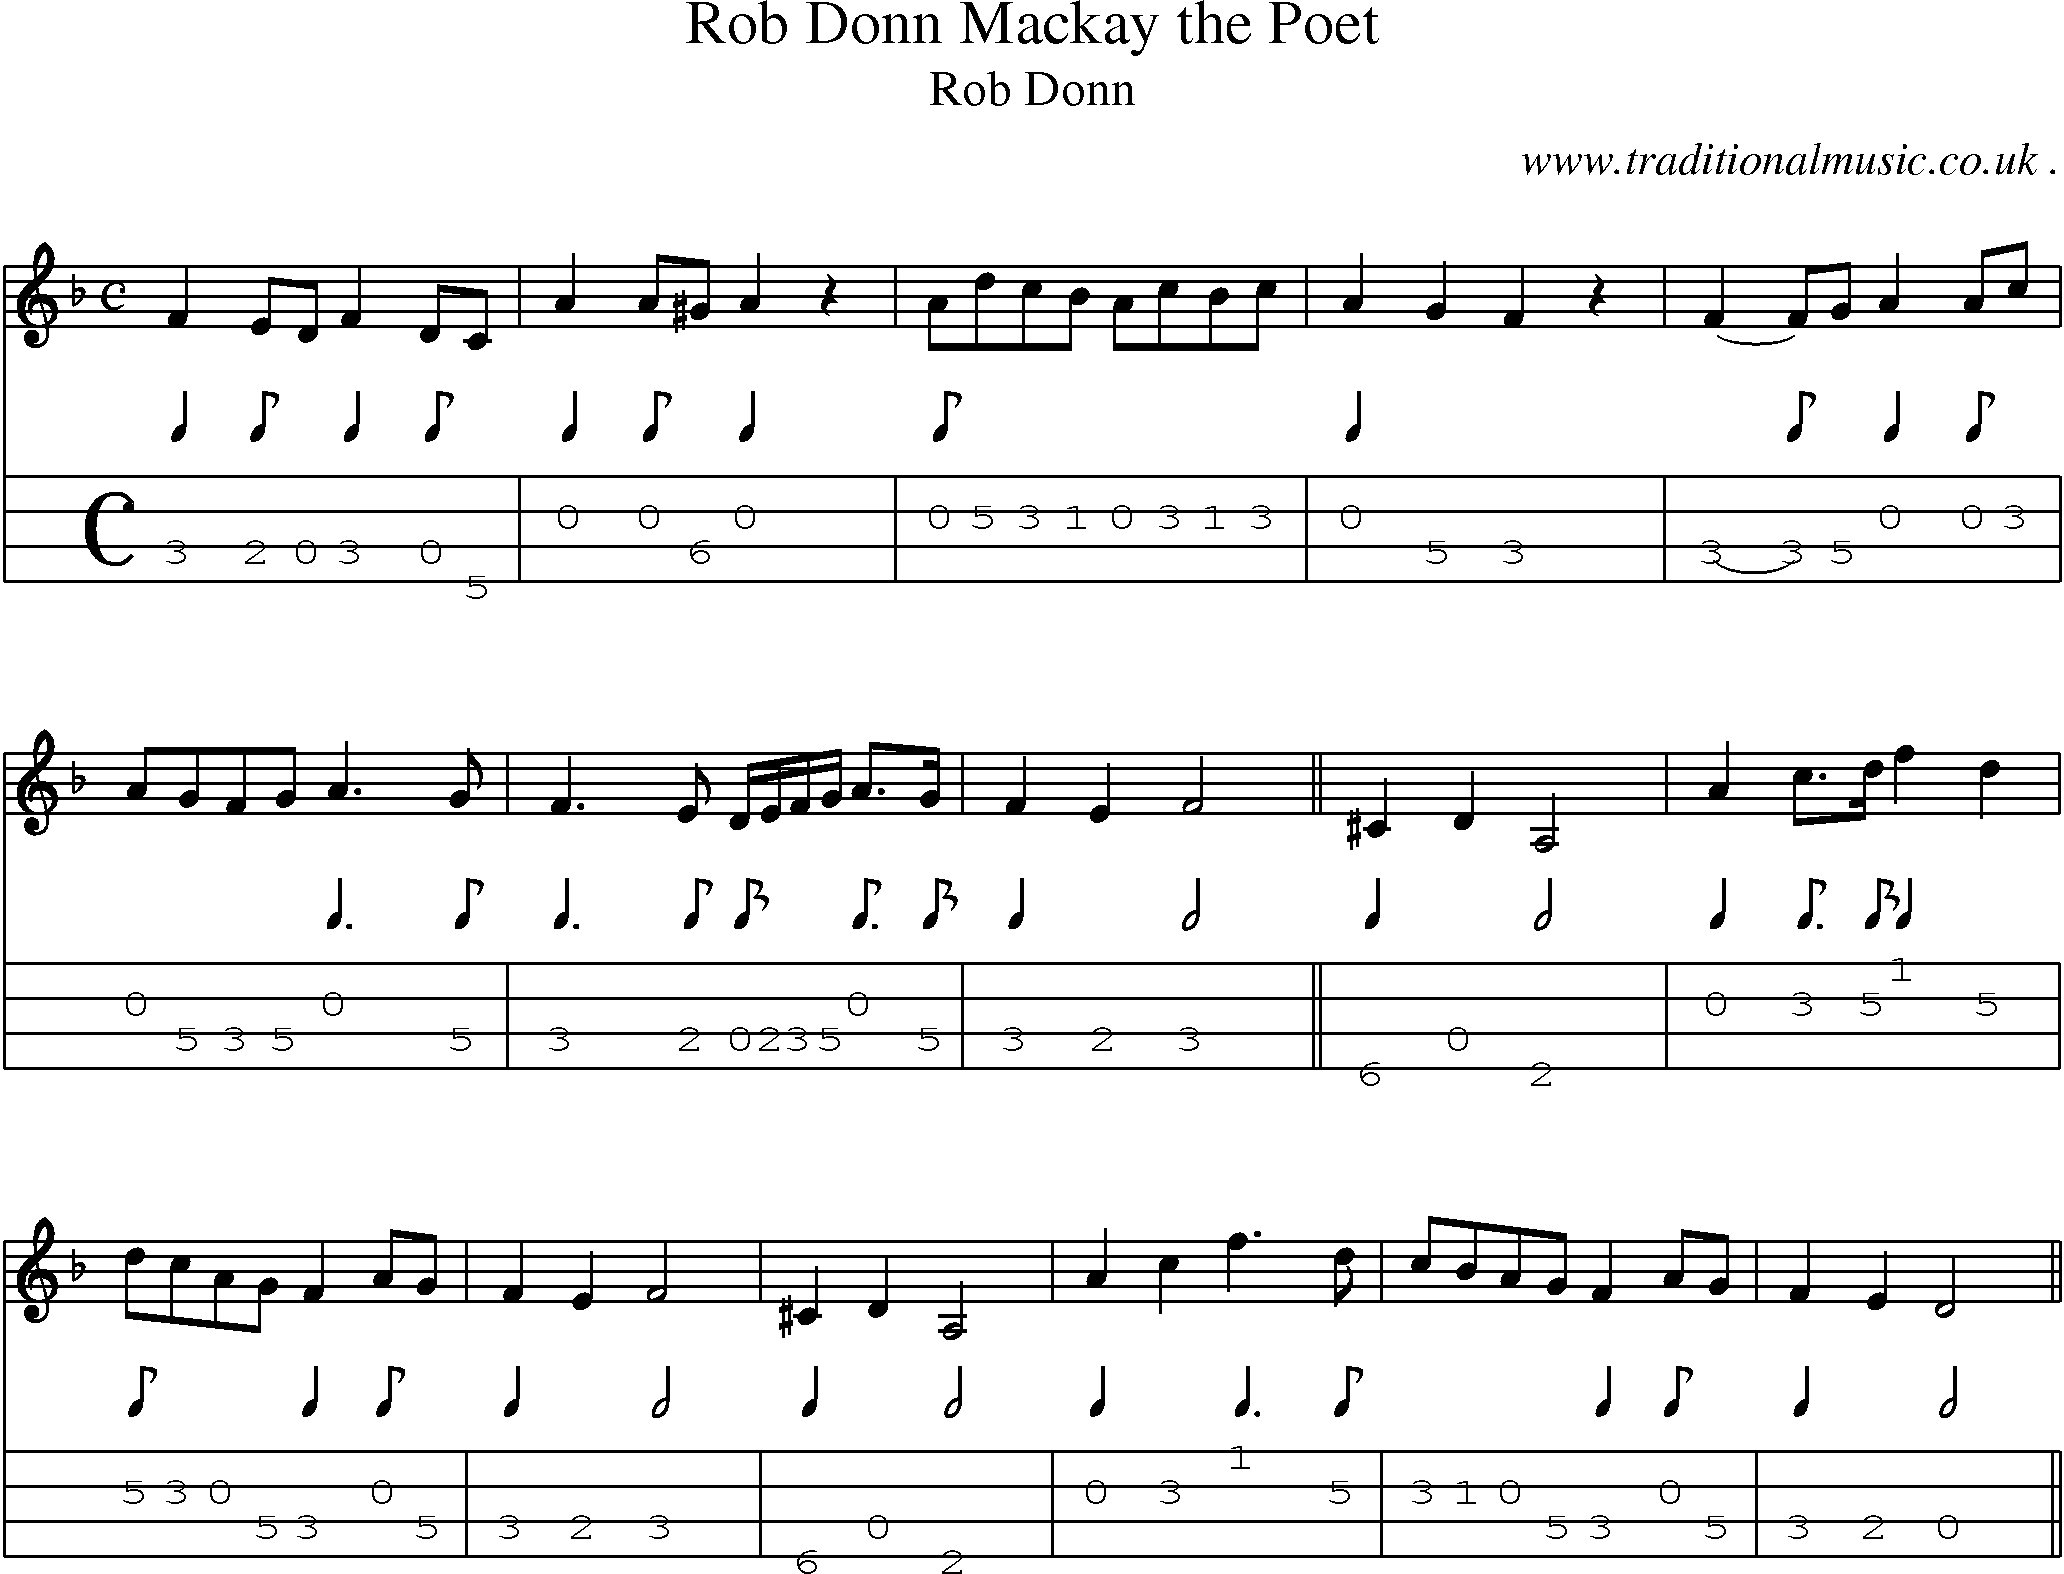 Sheet-music  score, Chords and Mandolin Tabs for Rob Donn Mackay The Poet